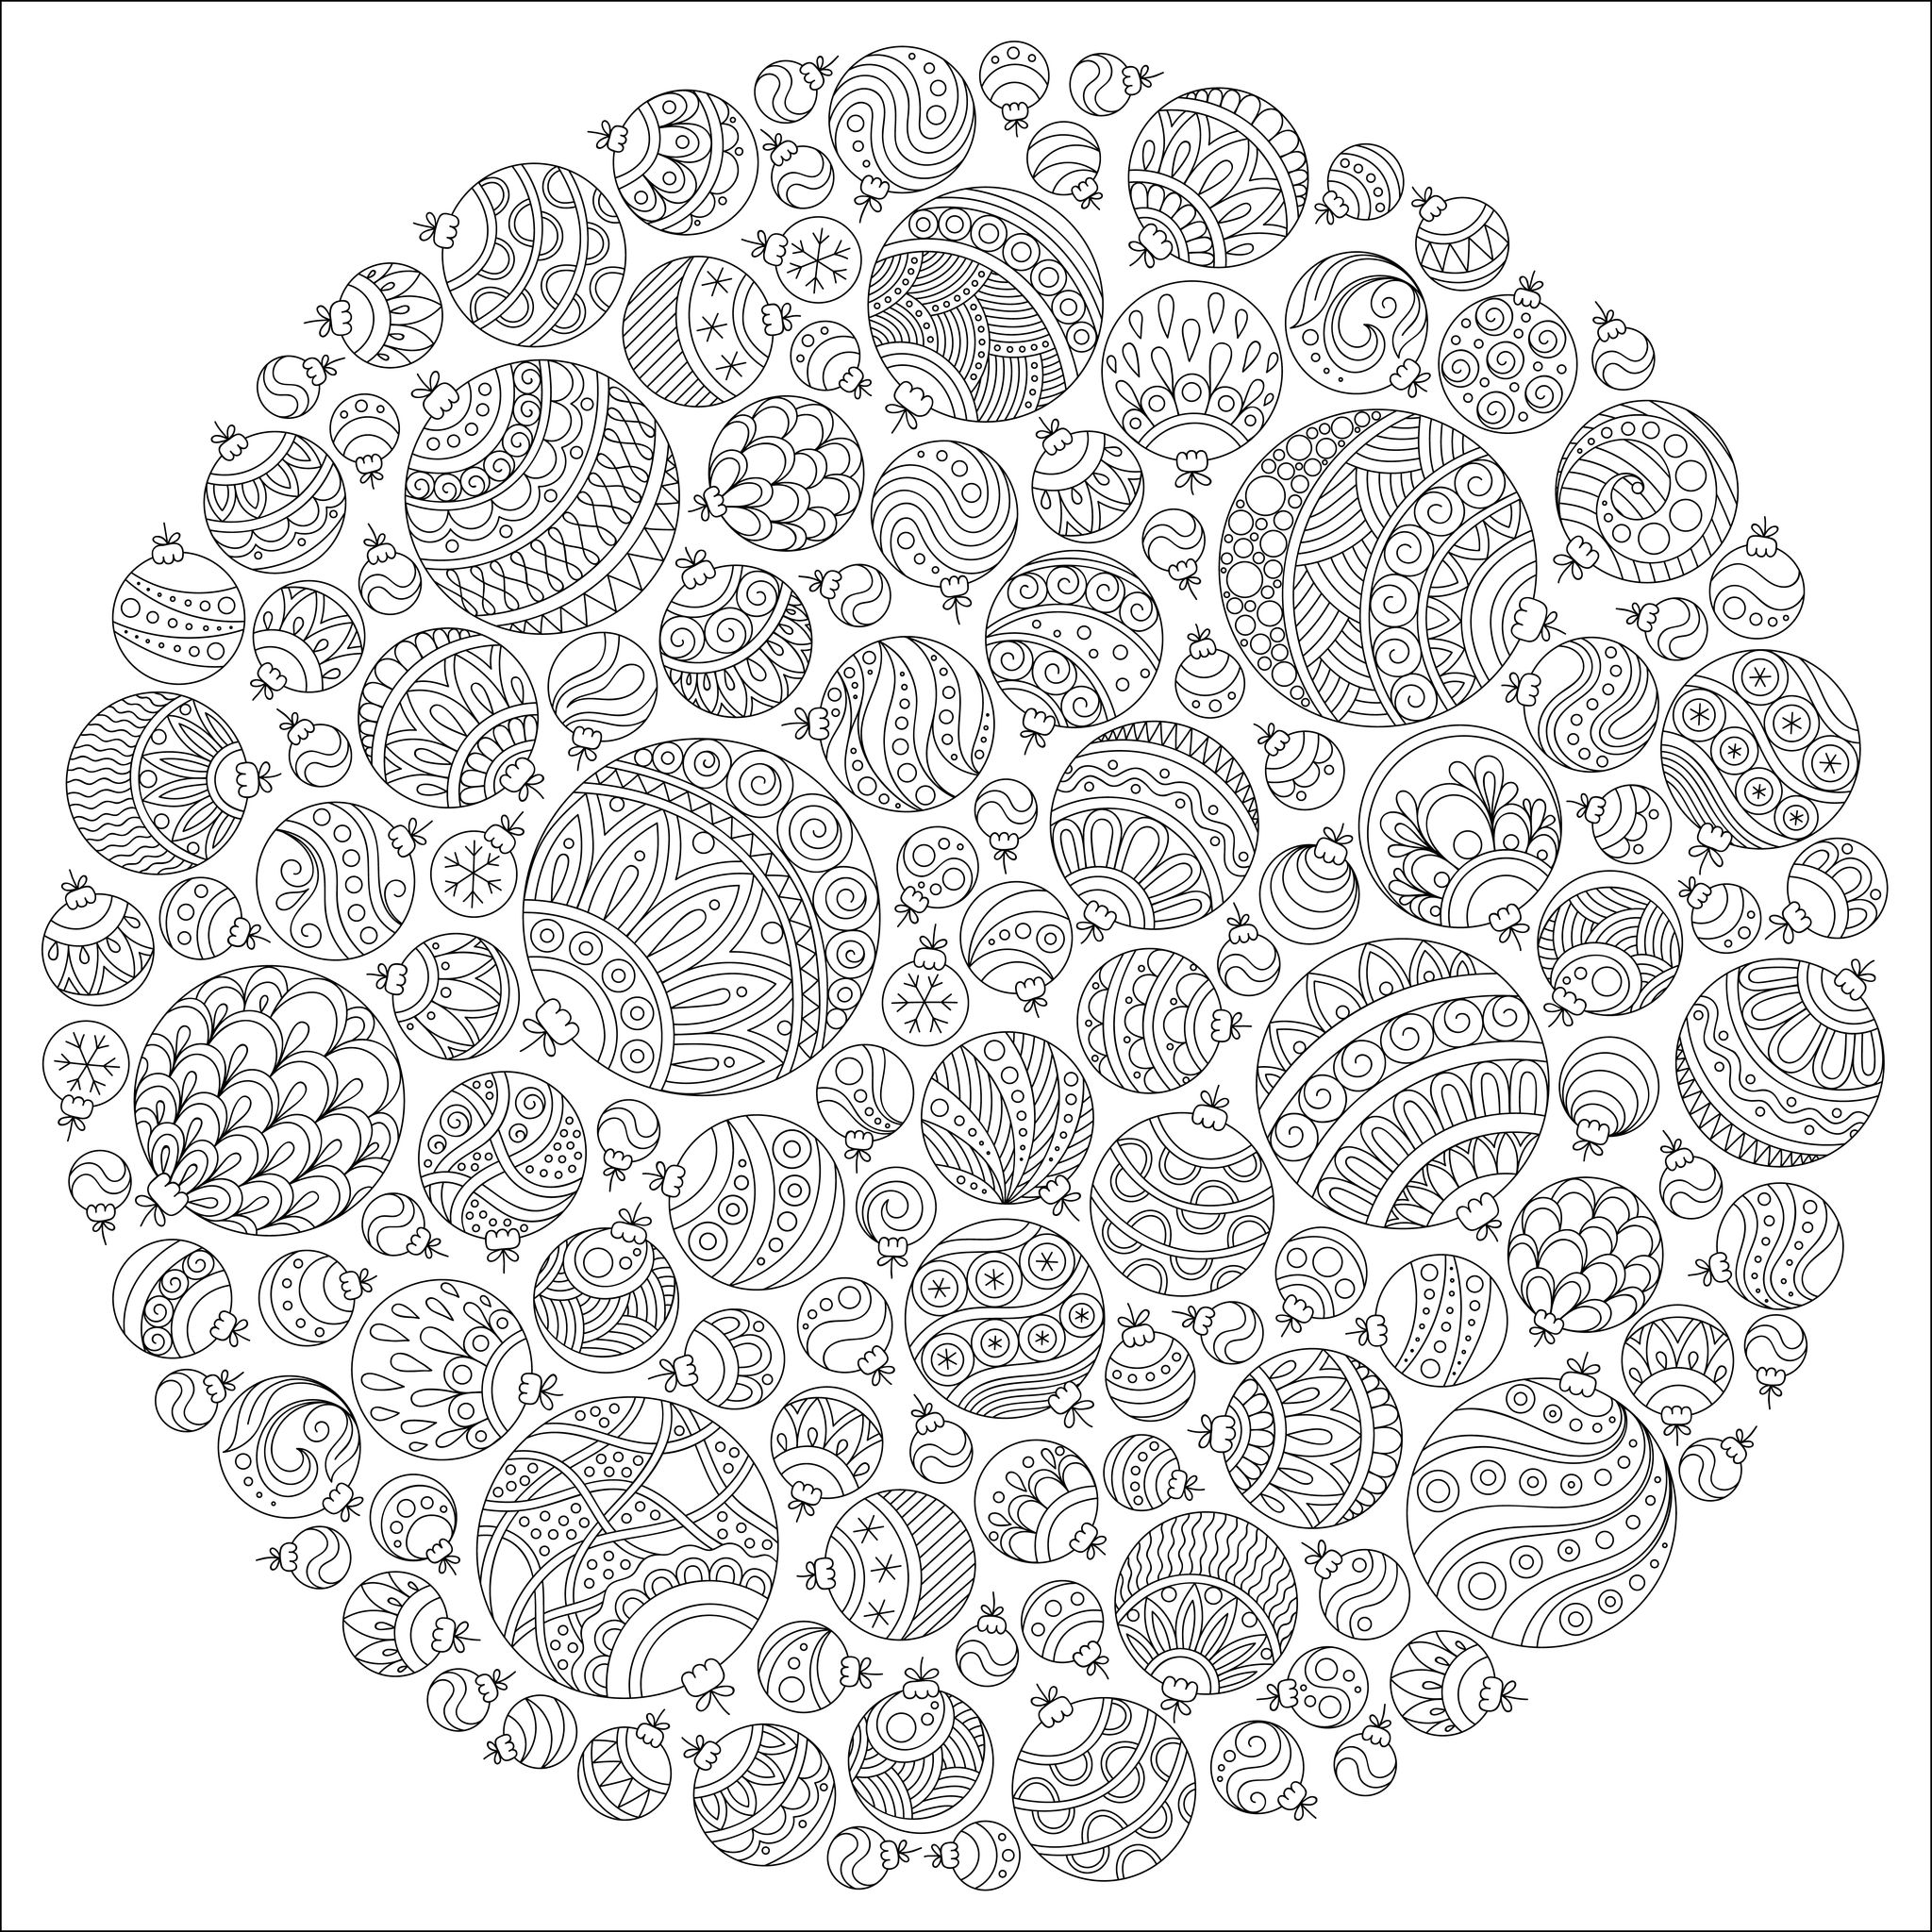 Christmas ball ornaments coloring page : different patterns and sizes